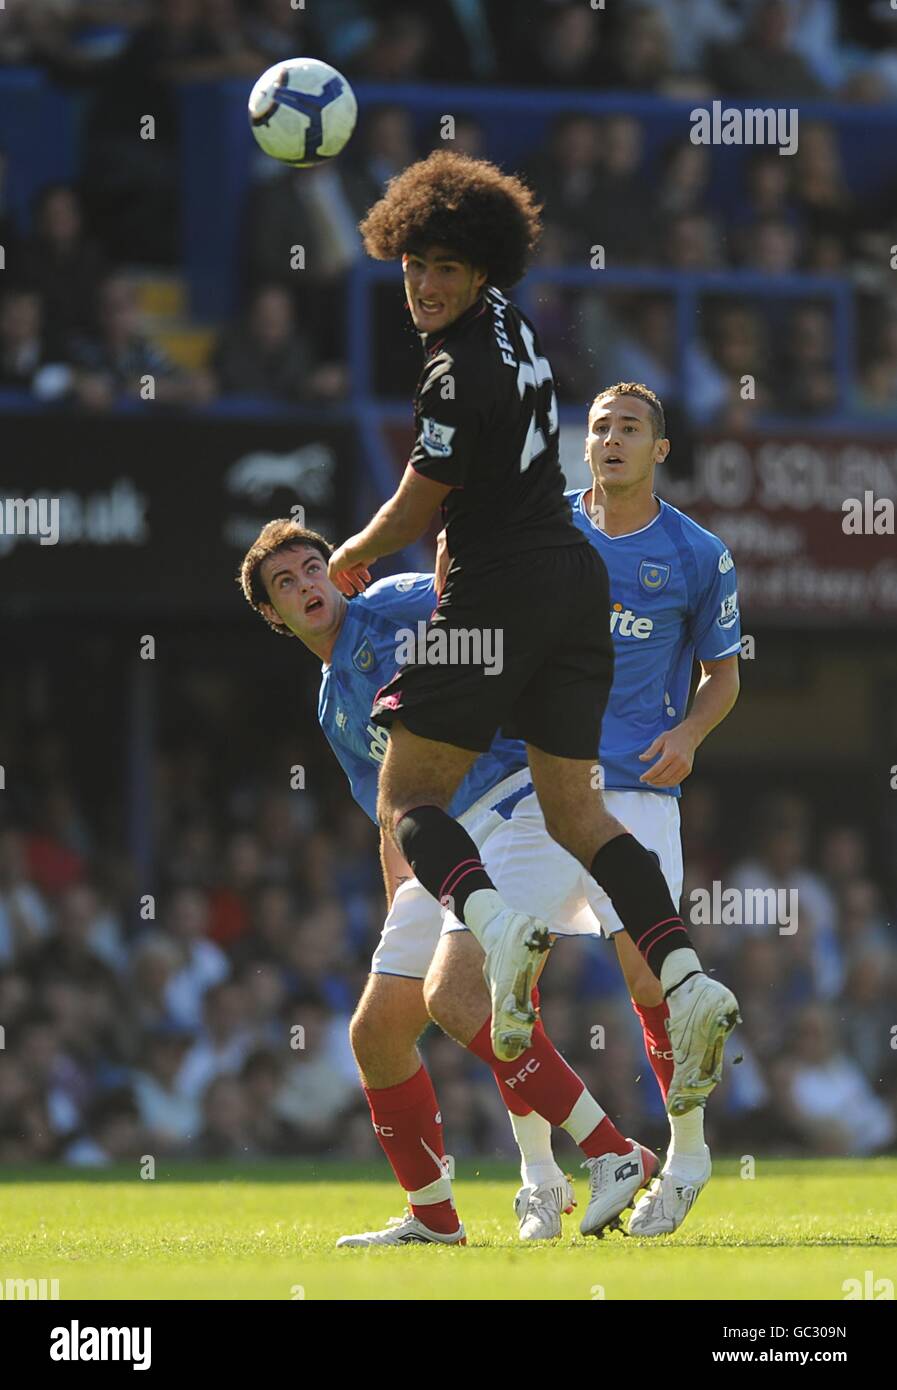 Everton's Marouane Fellaini (centre) in action as Portsmouth's Marc Wilson (left) and Hassan Yebda (right) look on Stock Photo